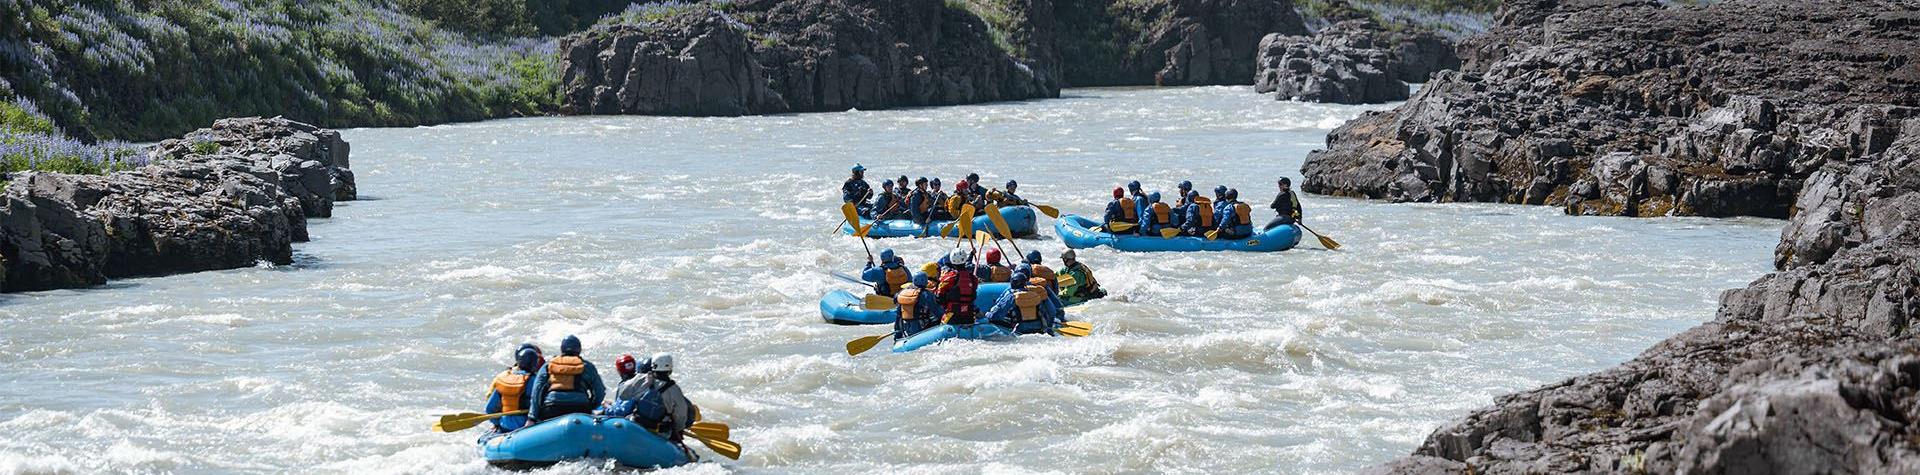 River Fun Rafting from Reykjavik 8- 8,5 hours (incl. pick-up 12:30) (U01)